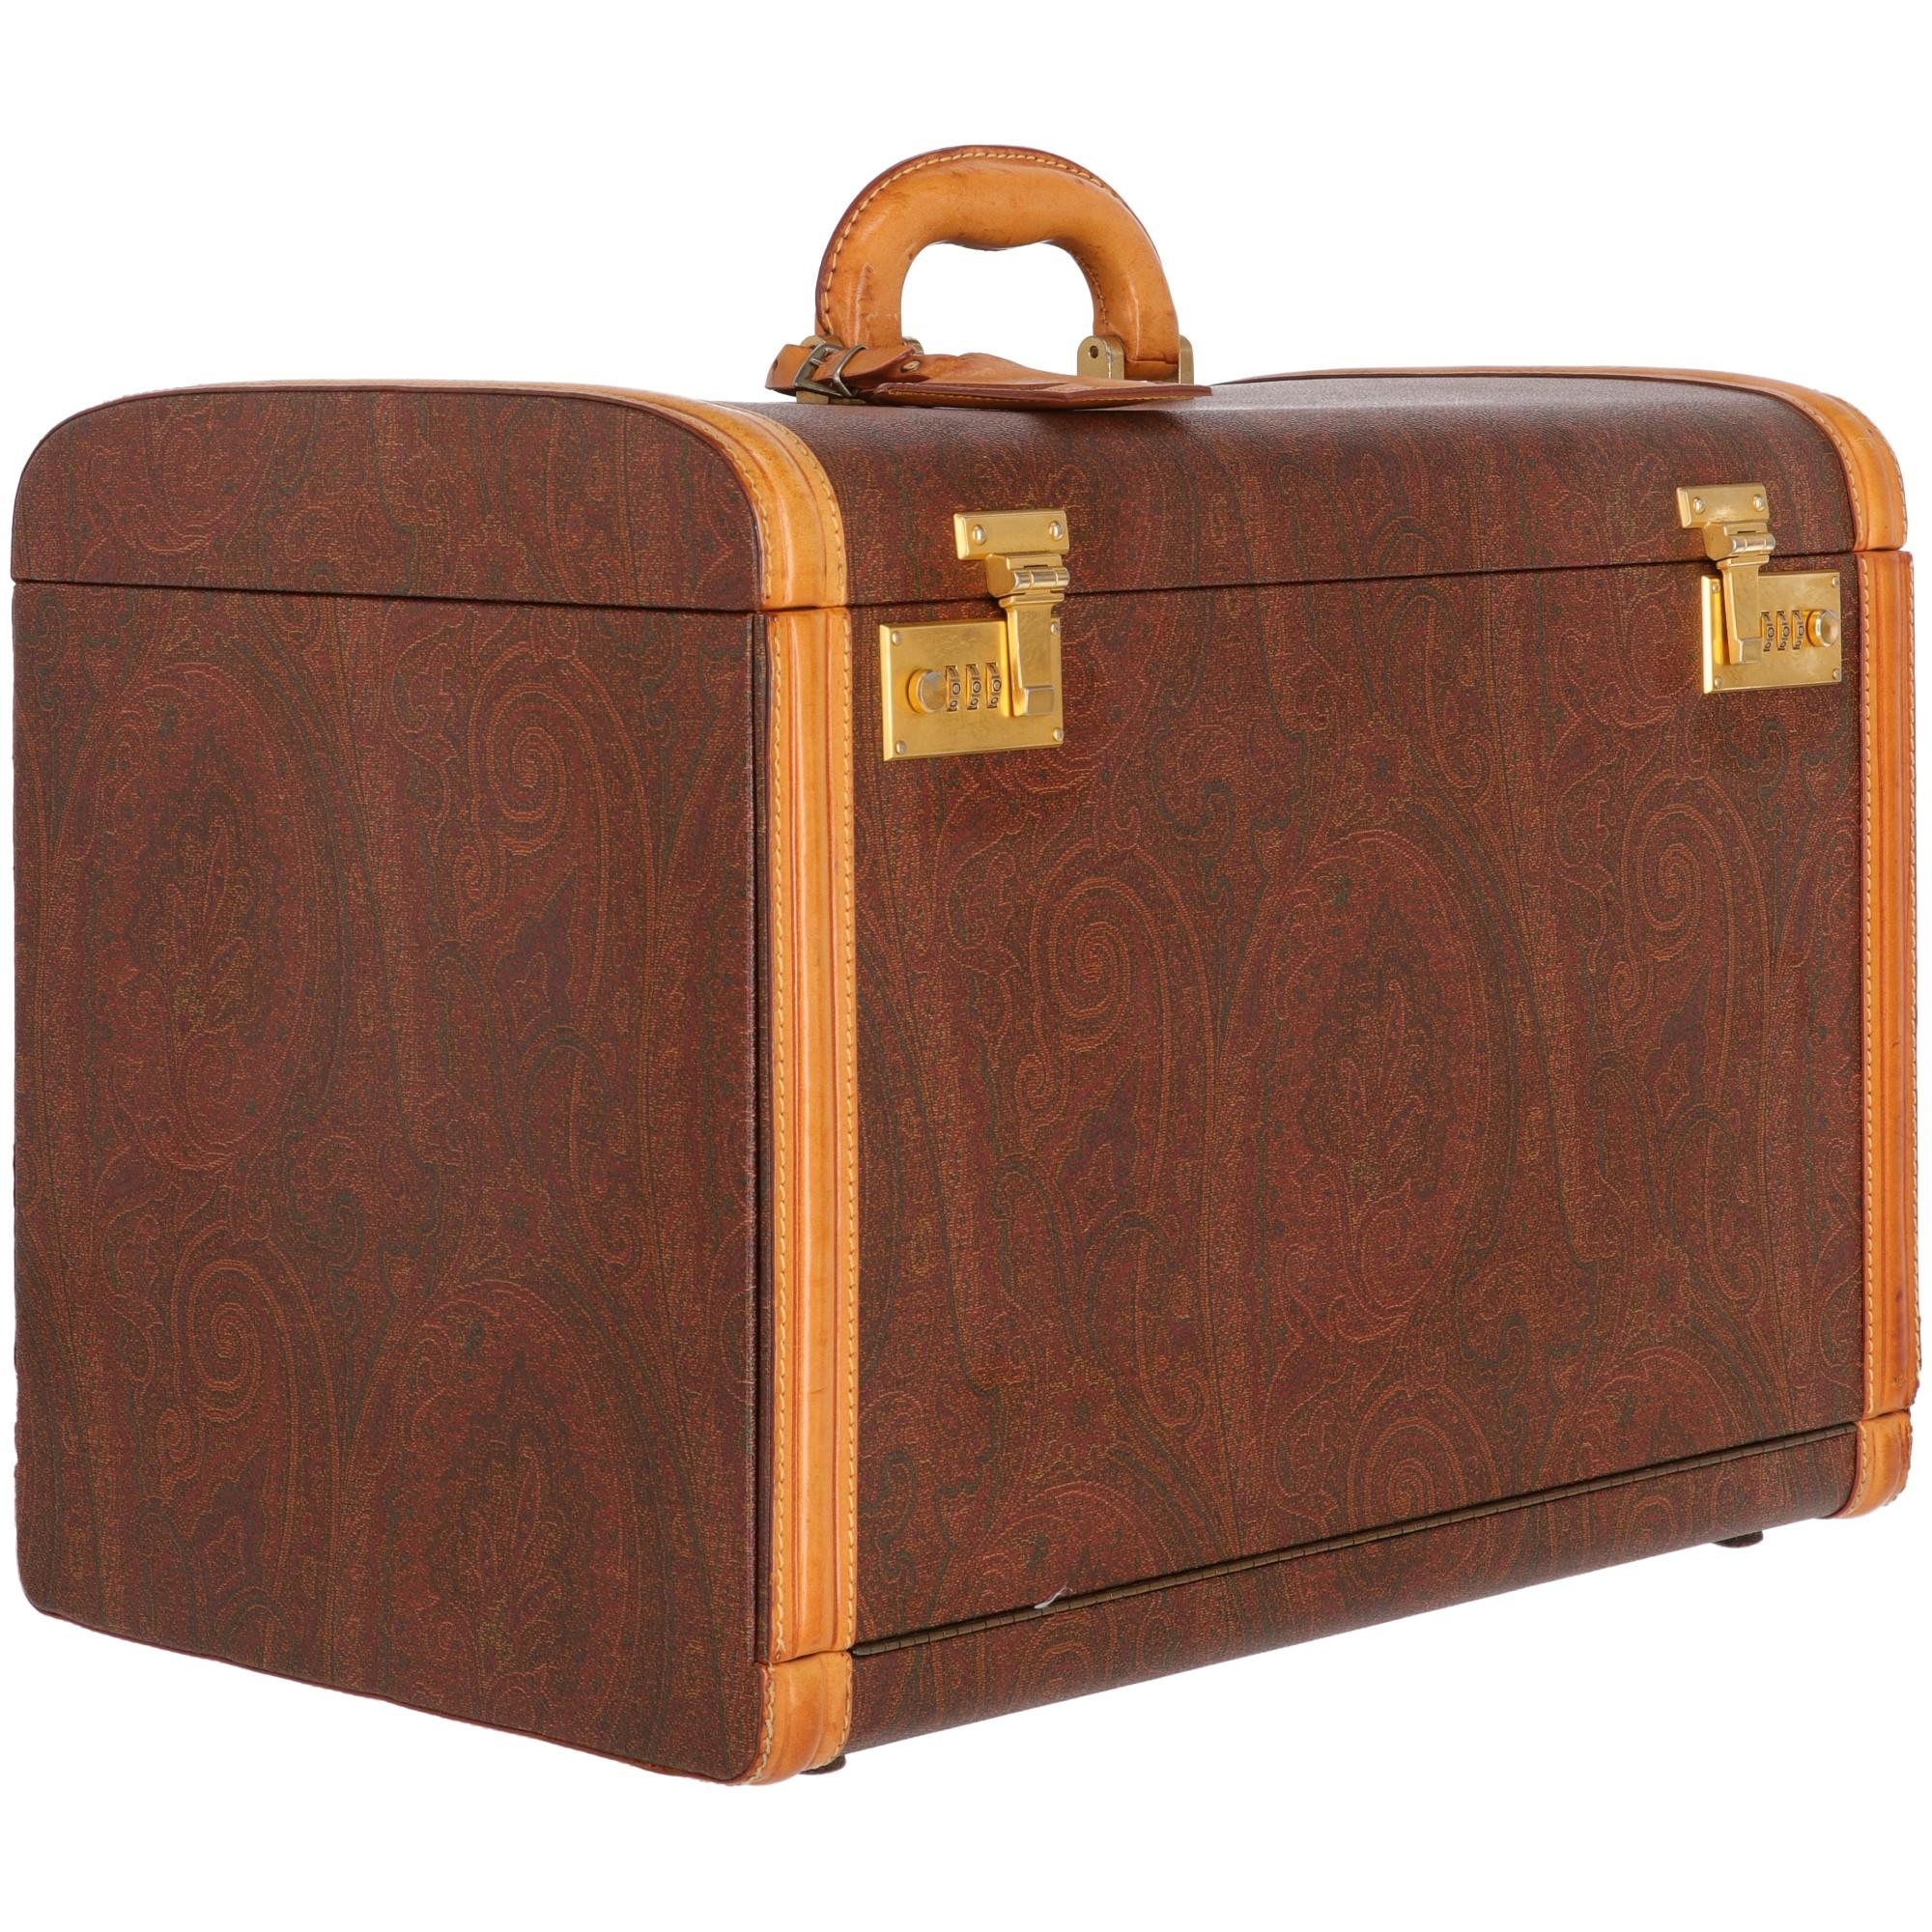 Timeless trunk by Etro in multicolor canvas with sophisticated baroque motif and brown caramel-tone real lather edges. It features a rigid leather single handle with luggage tag, two gold-tone metal combination locks on the front and four bag feet.